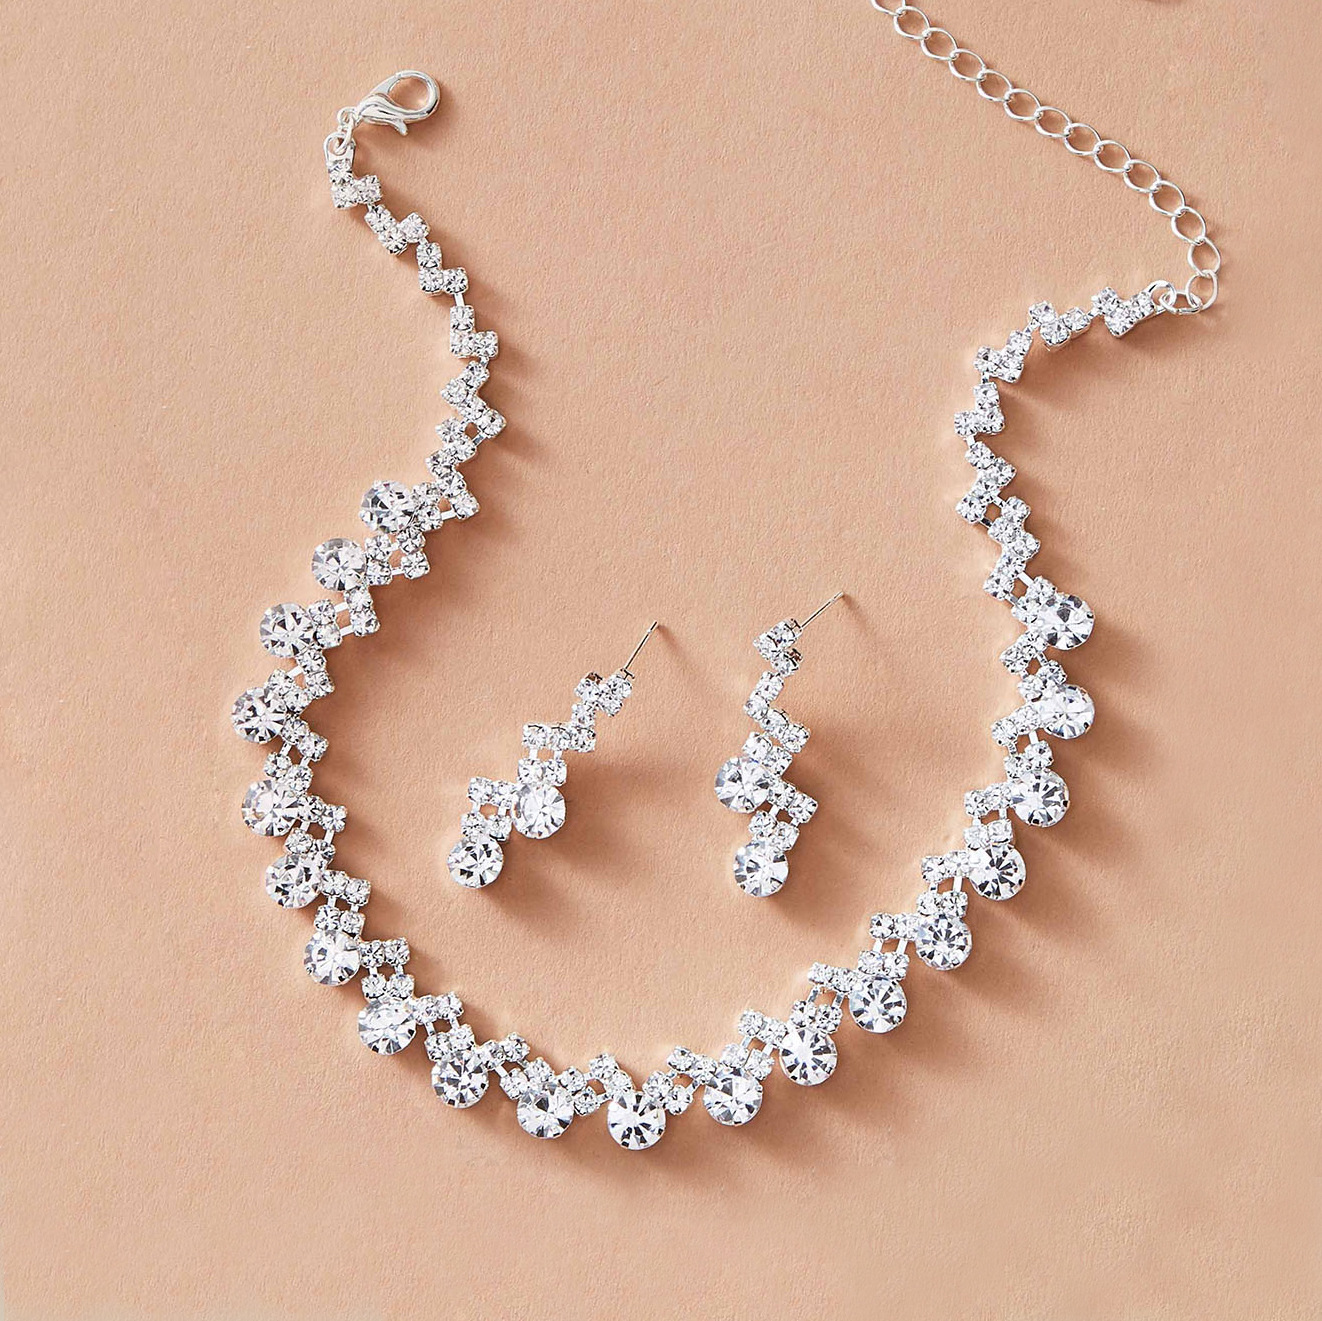 European and American Jewelry Wedding Accessories Two-Piece Bridal Silver Plated Claw Chain Rhinestone Set Necklace Earrings Bracelet N5664